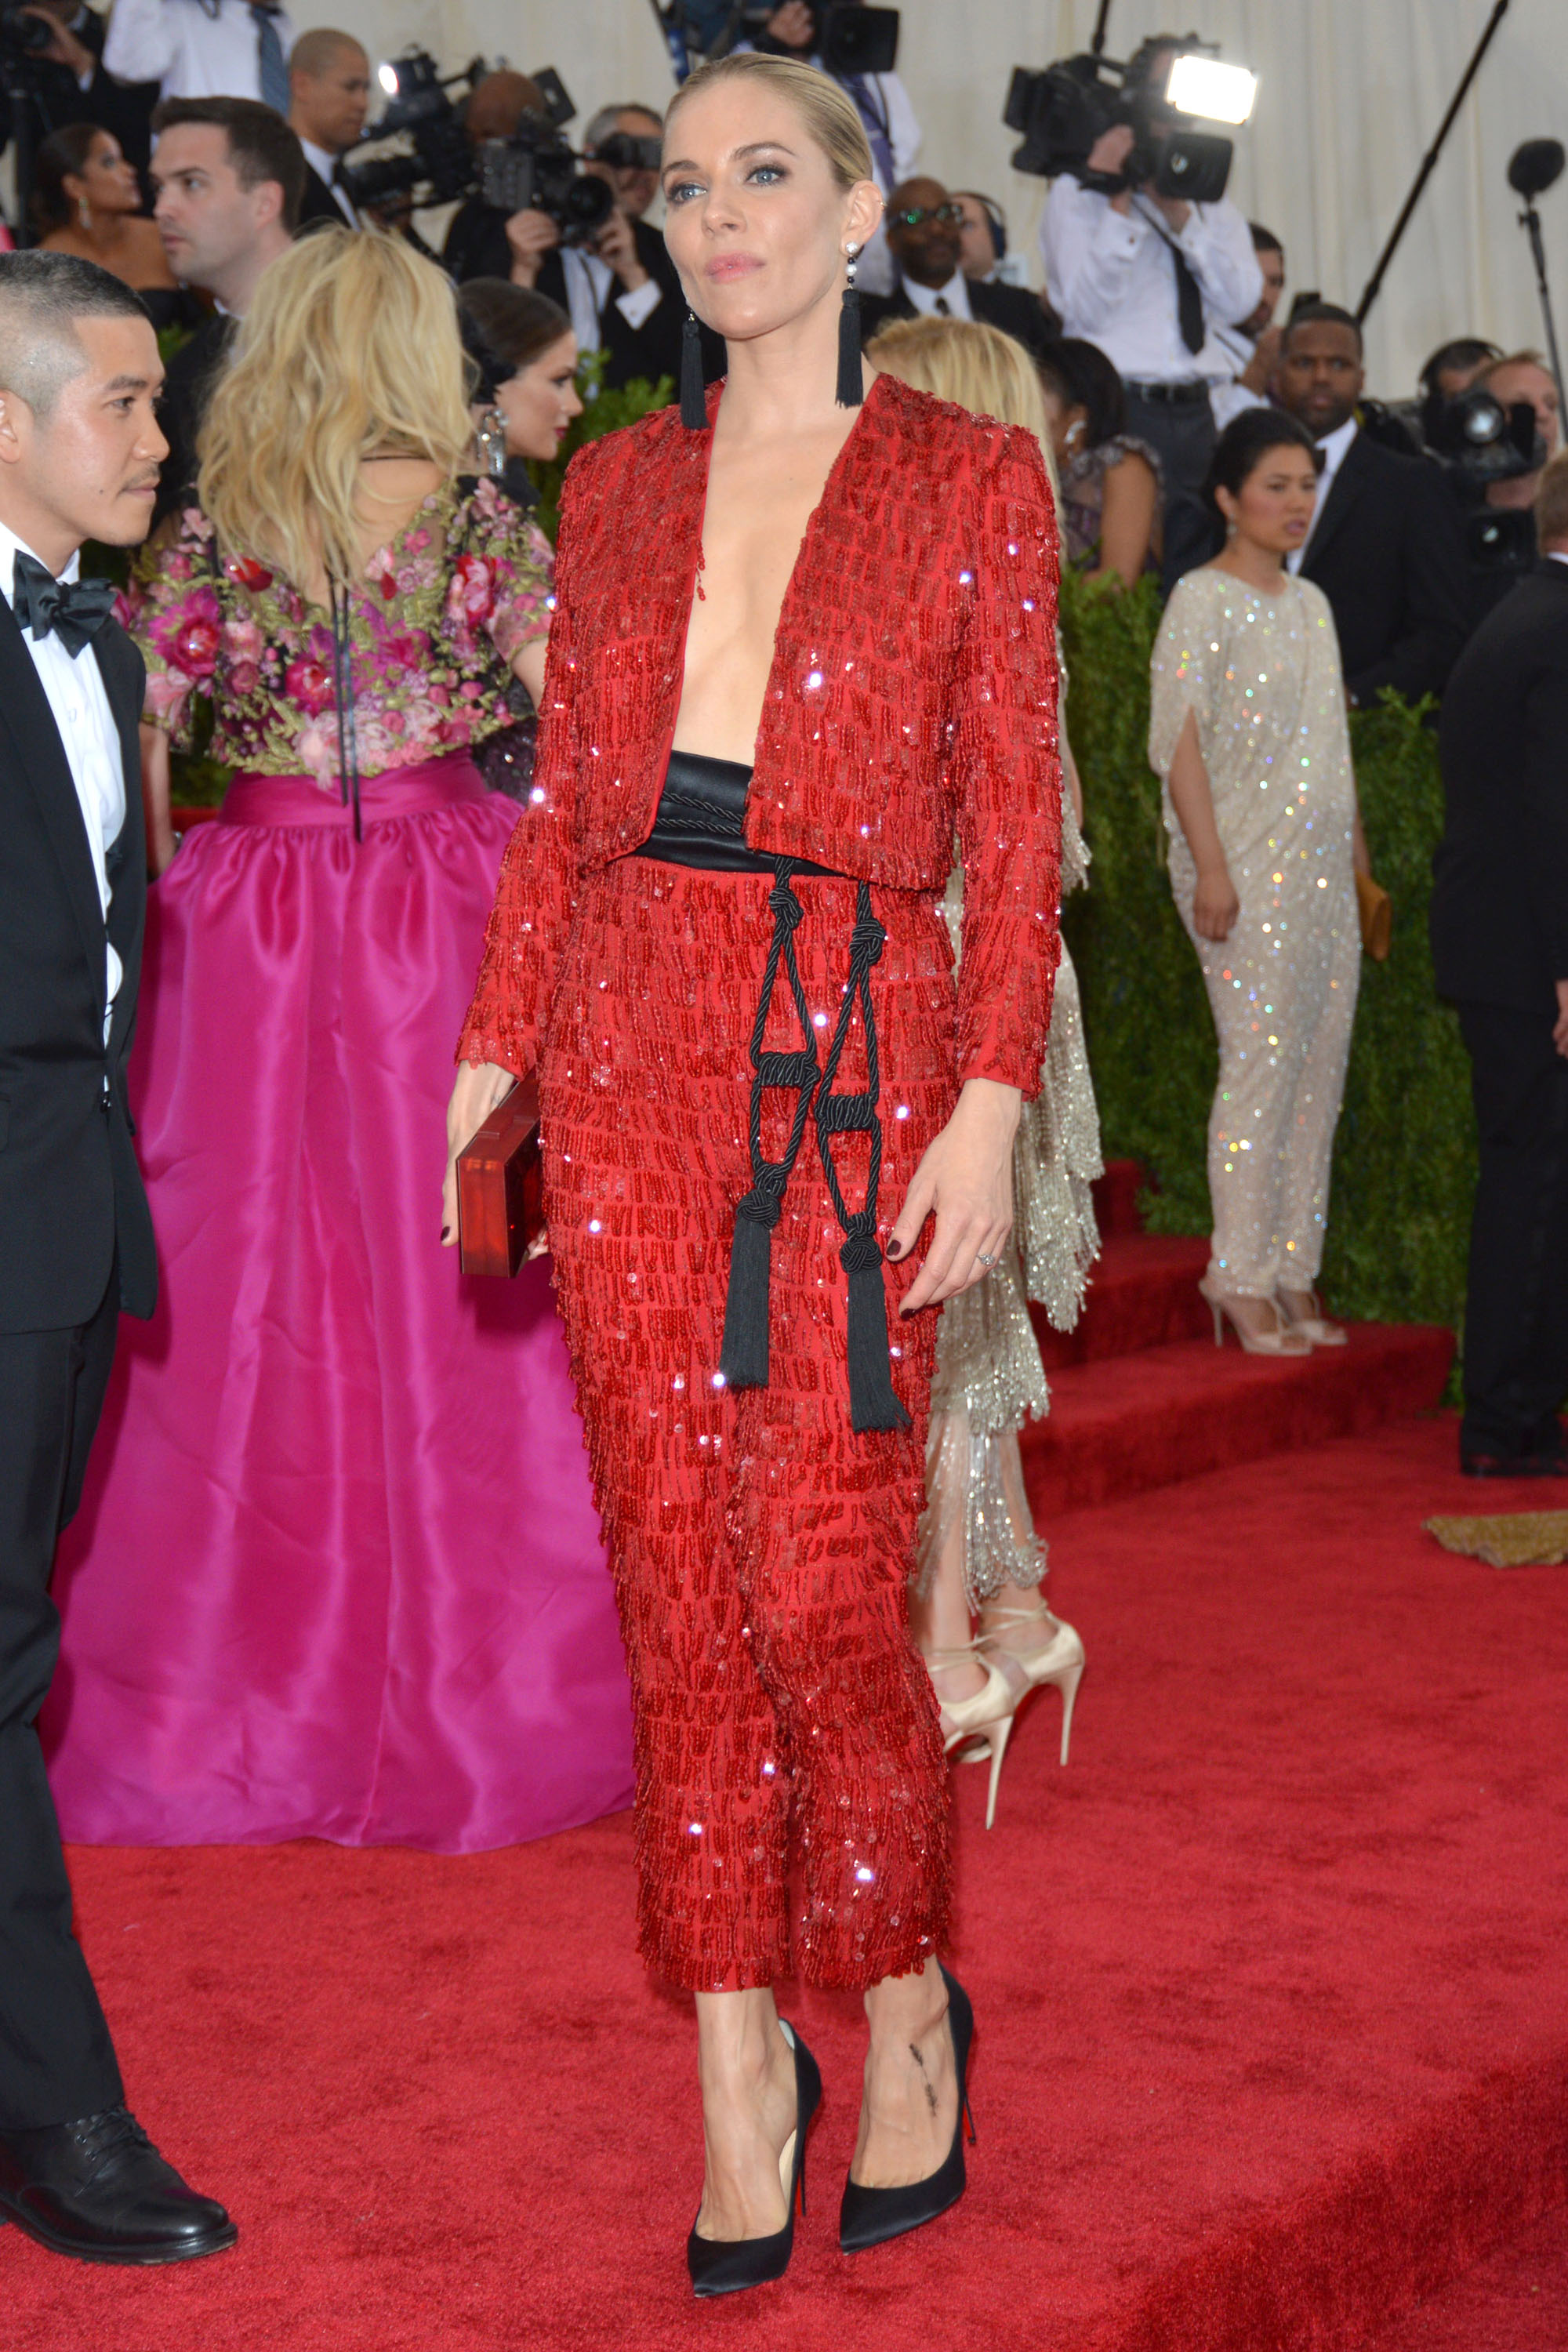 Met Ball Fugs and Fabs: More Women In Red